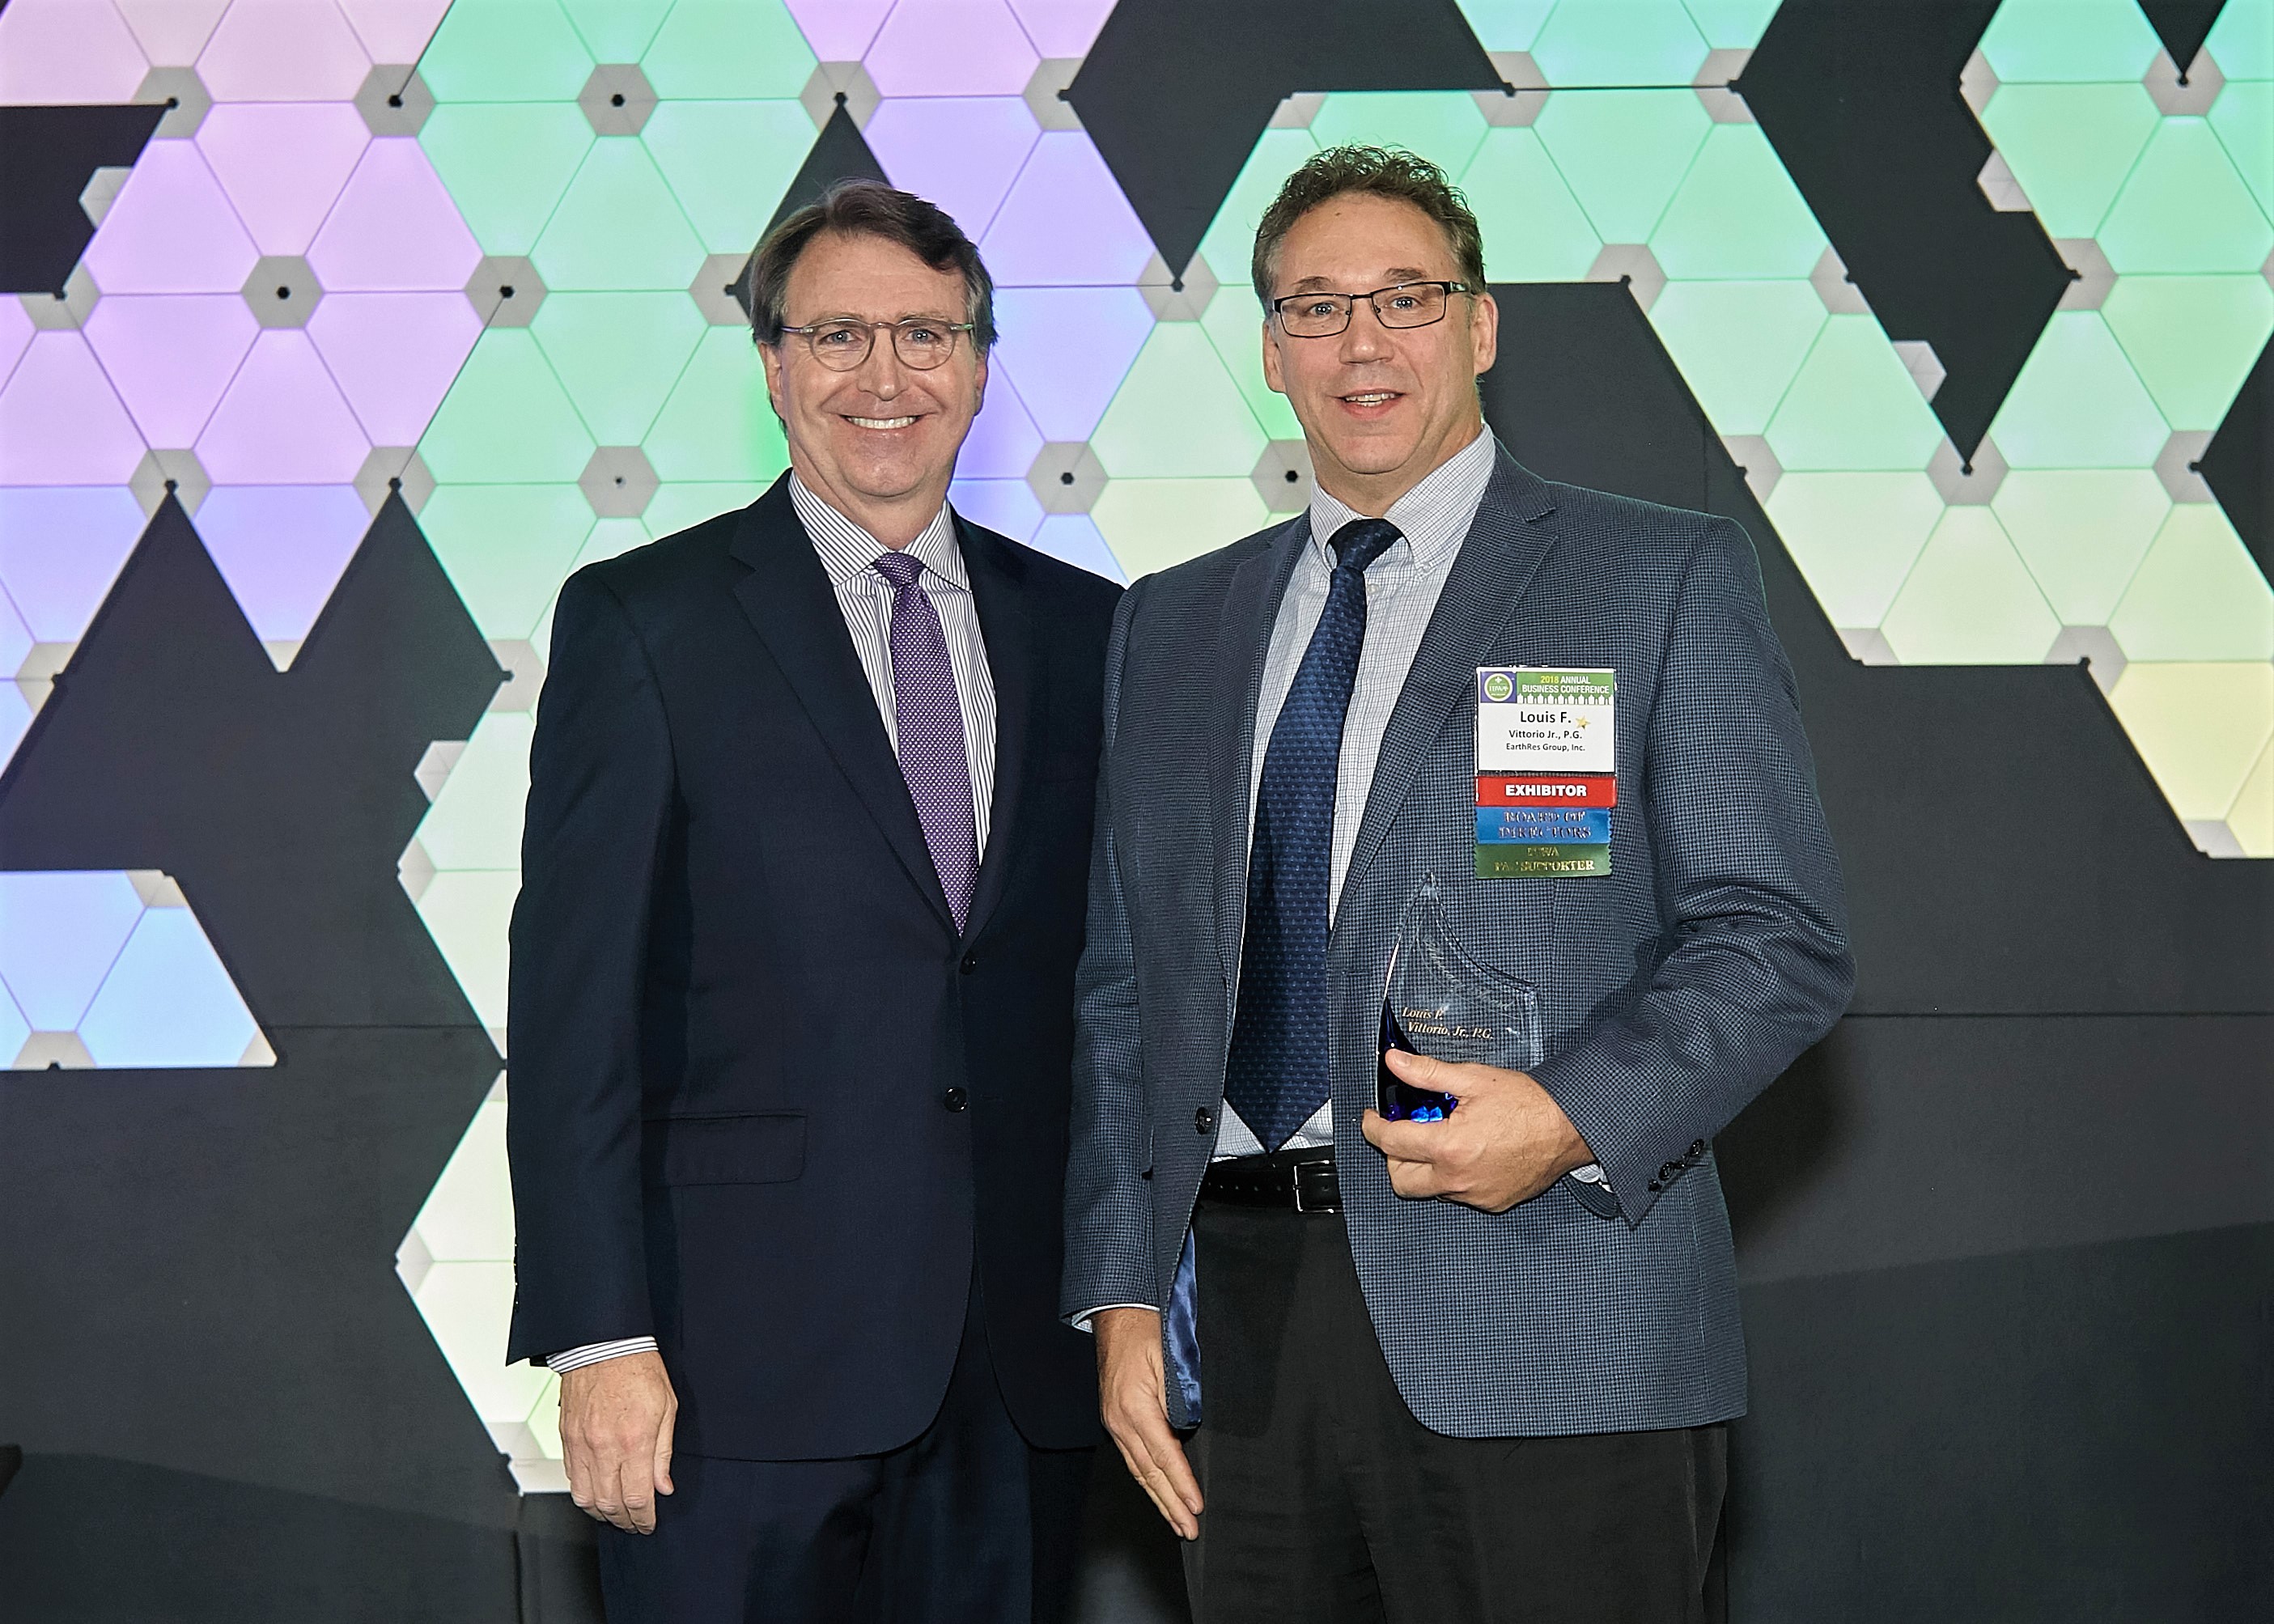 IBWA Convention Committee Co-Chair Dan Kelly (left) presents IBWA/Shayron Barnes-Selby Advocacy Award to EARTHRES VP Lou F. Vittorio, Jr., P.G. (right).  Photo courtesy of IBWA.